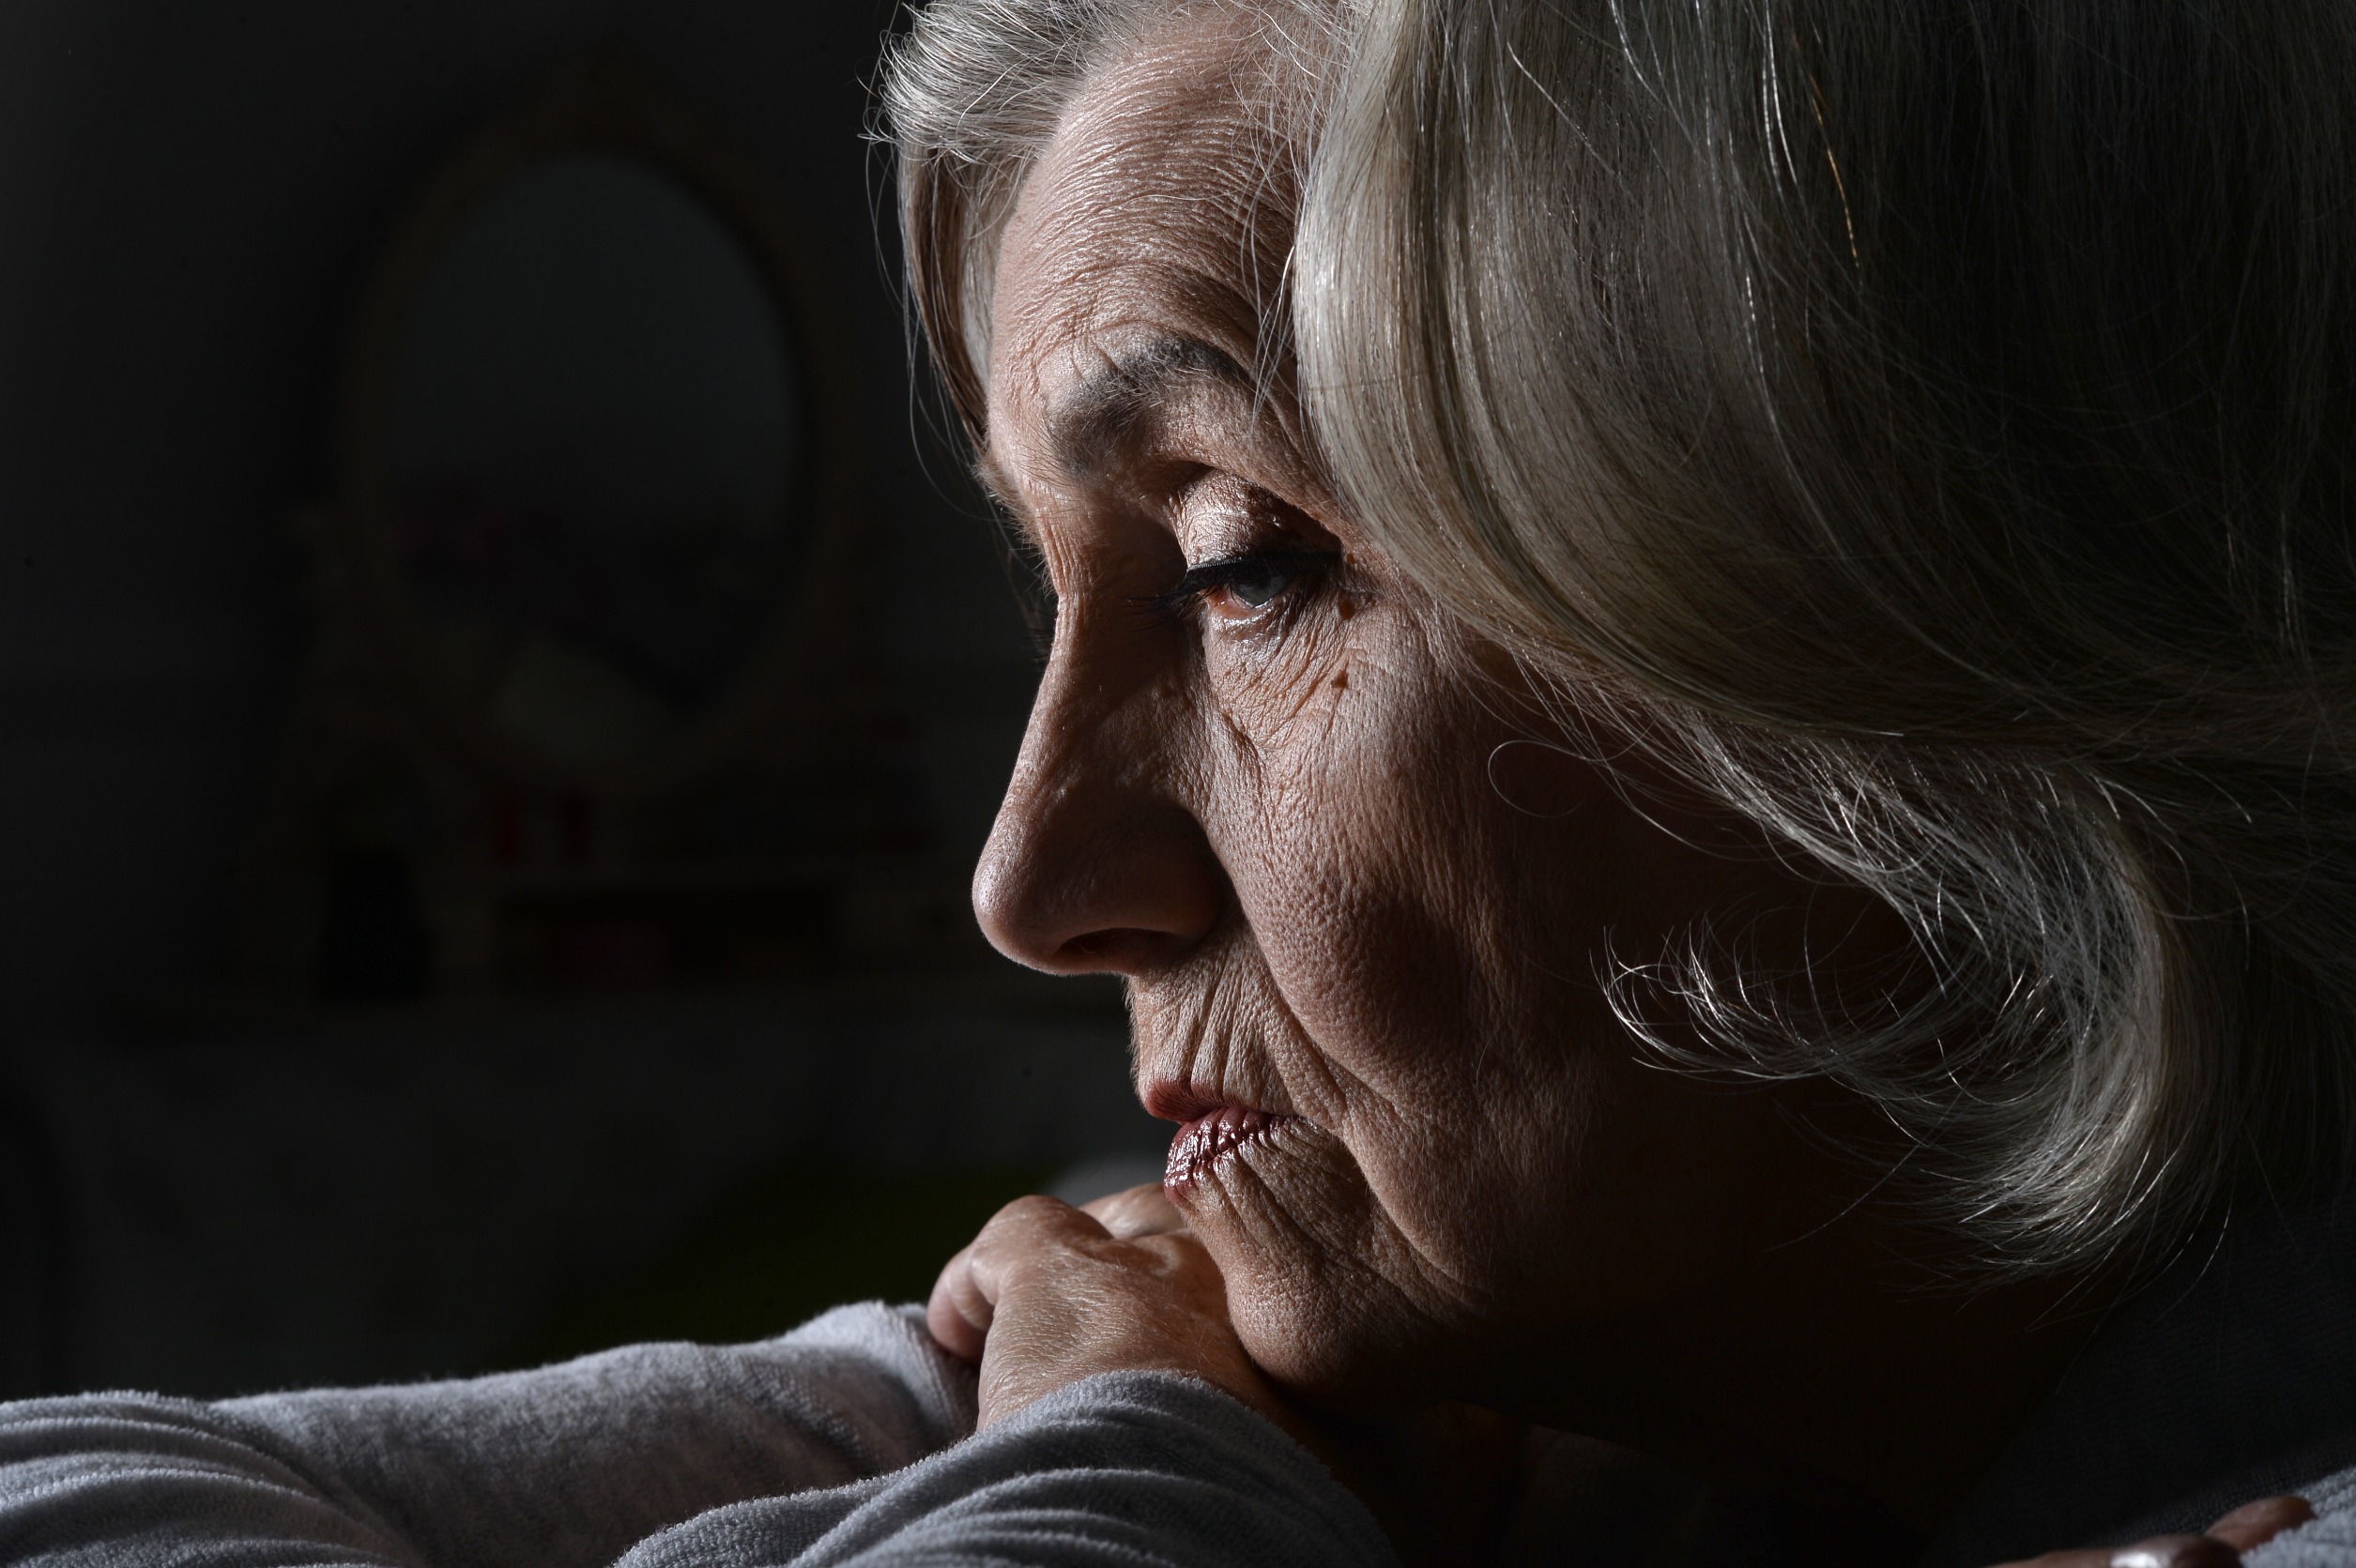 Who is at a higher risk of elder abuse